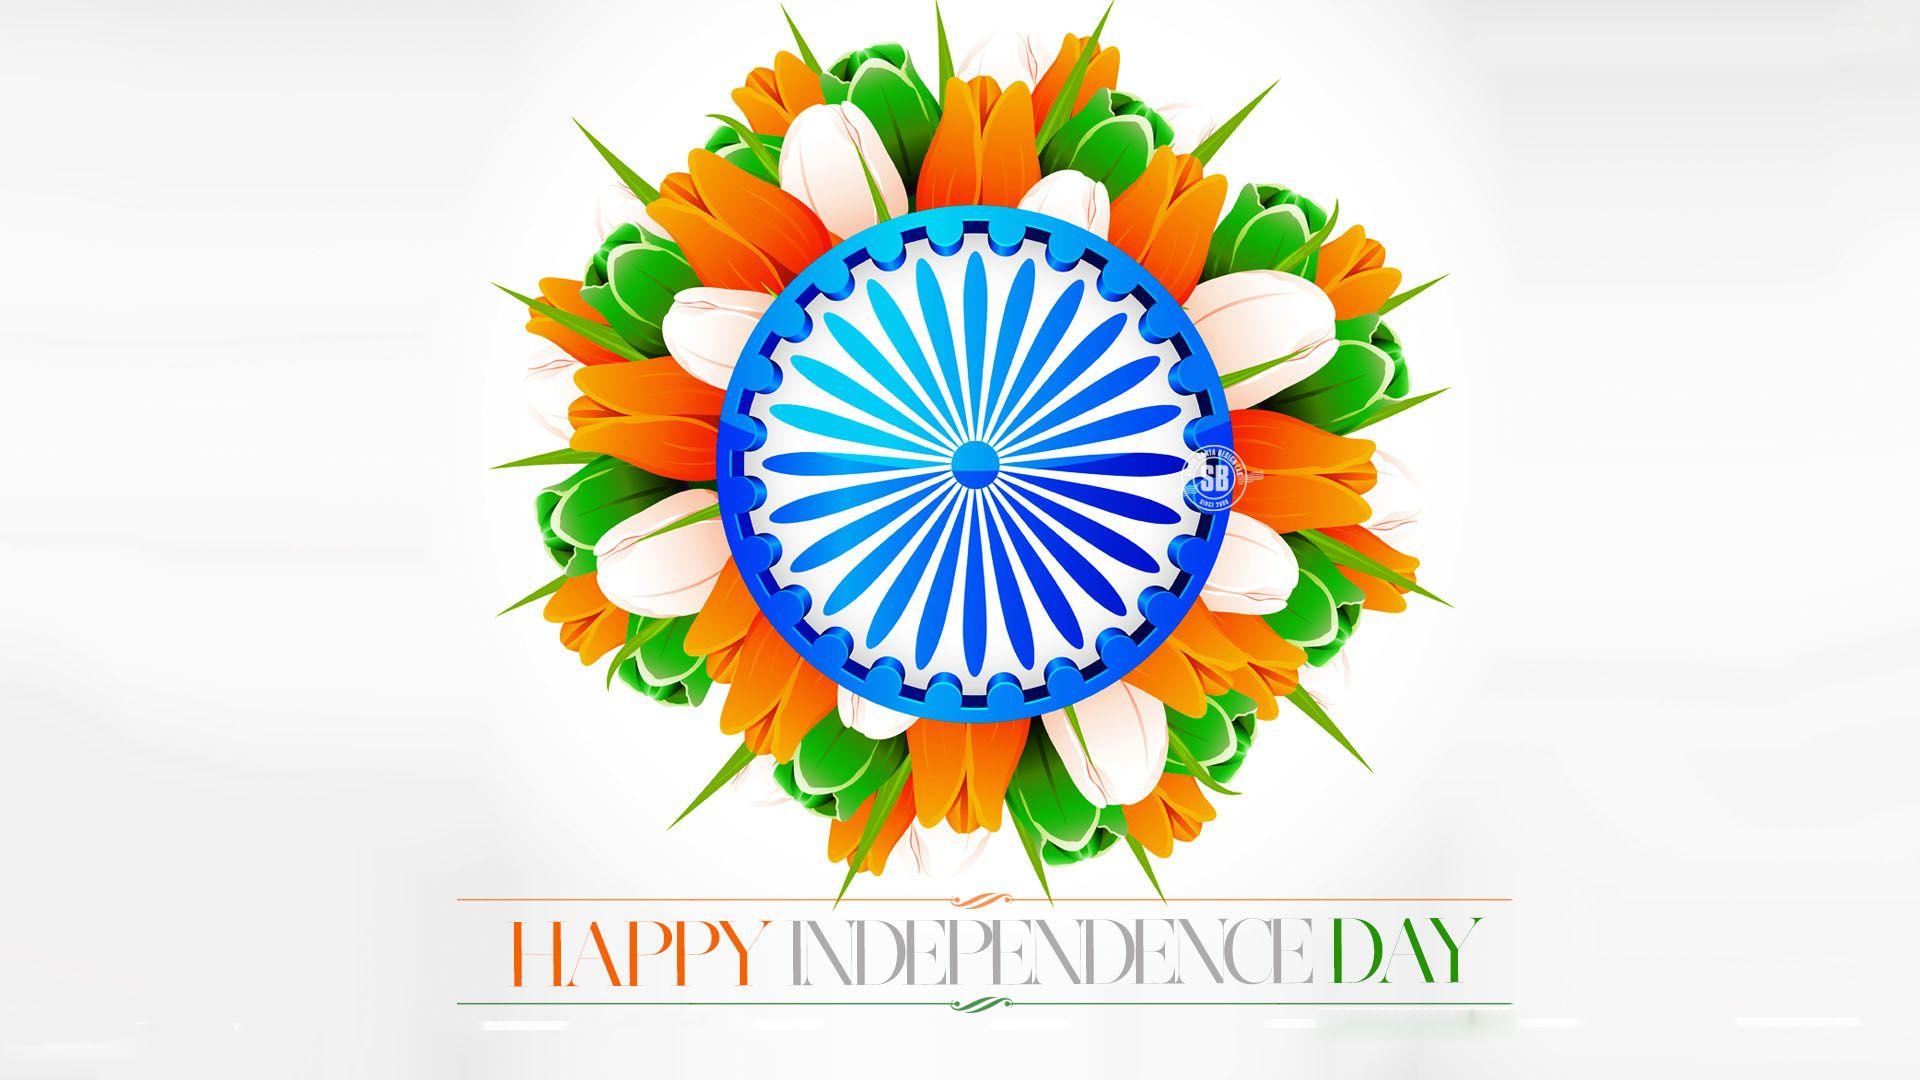 15th August Wallpaper HD. Newhdpics. Independence day wallpaper